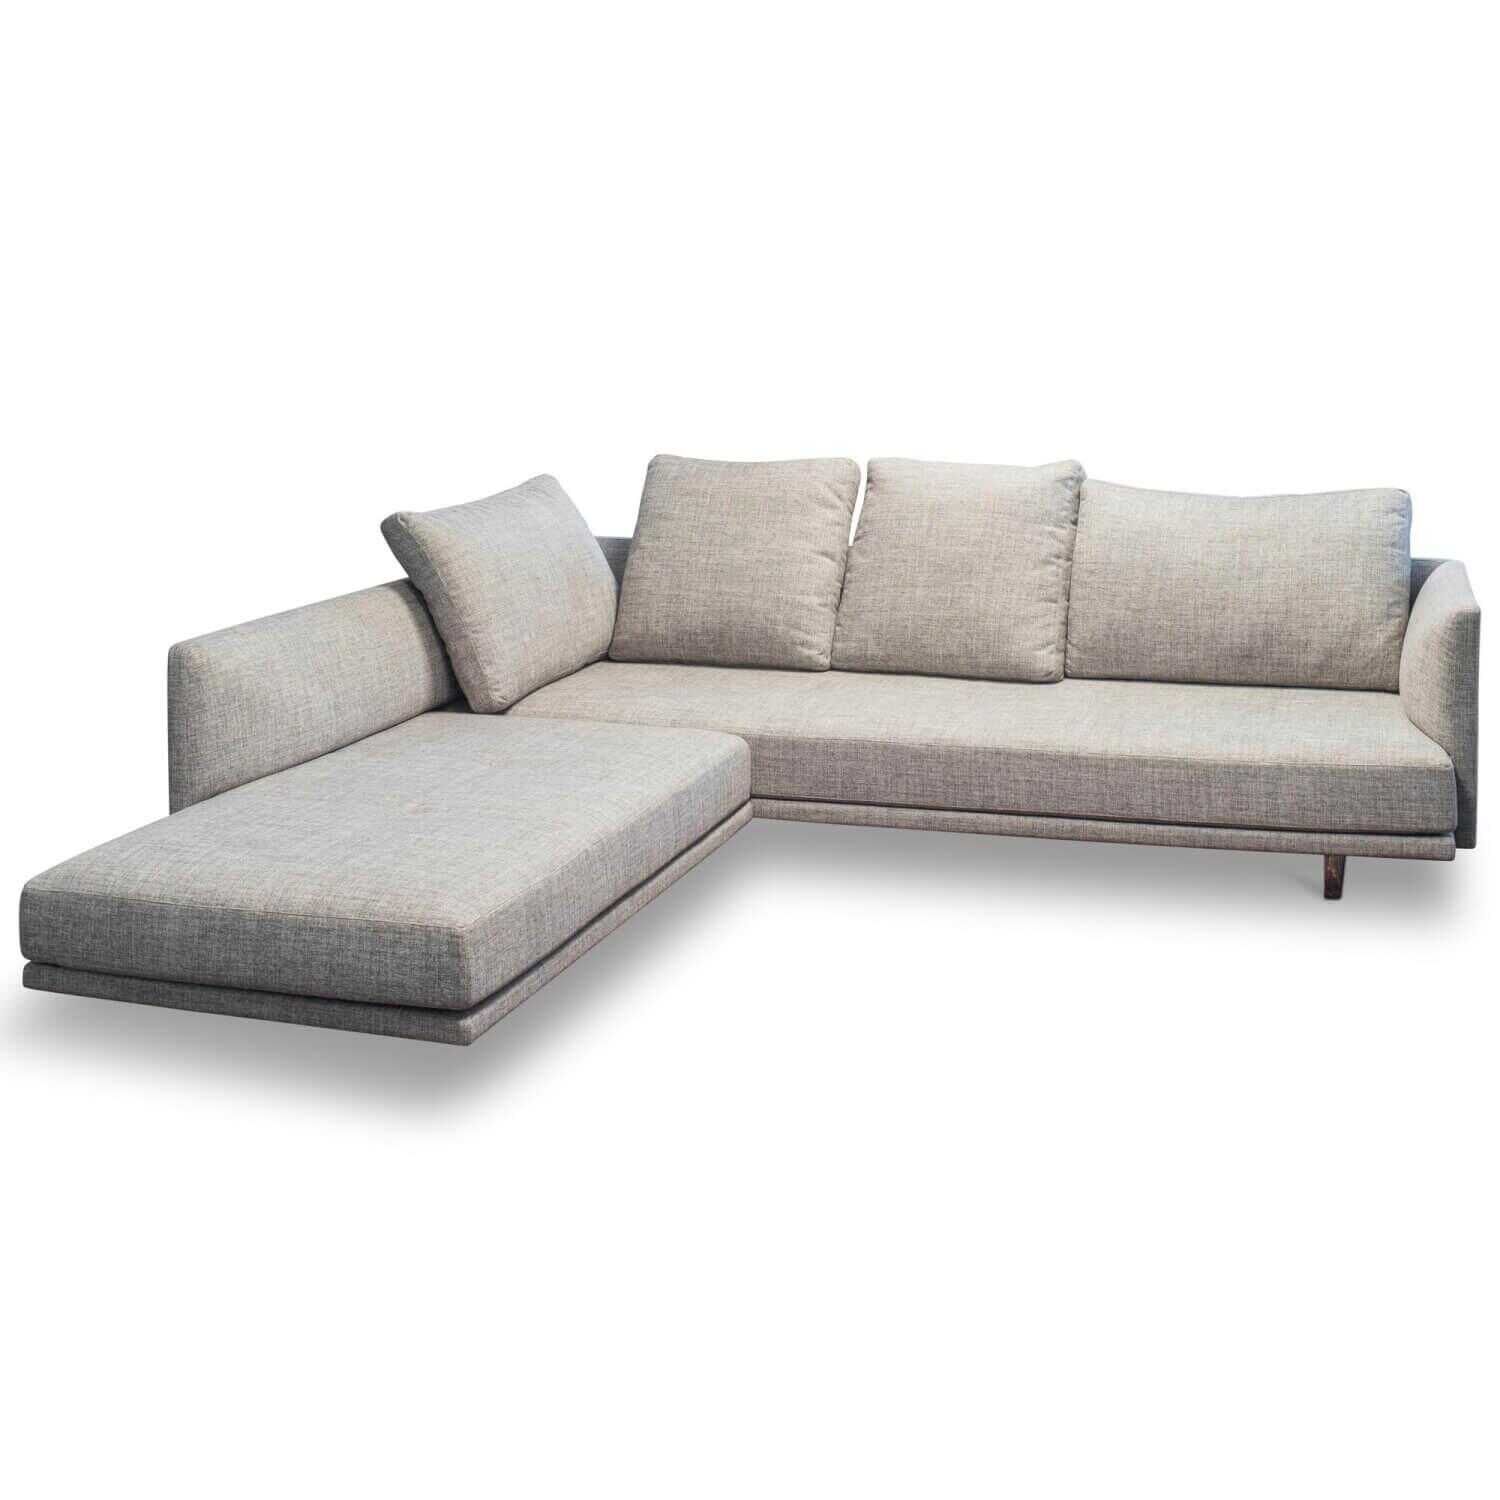 Sofa Prime Time Stoff Grau Relaxfunktion